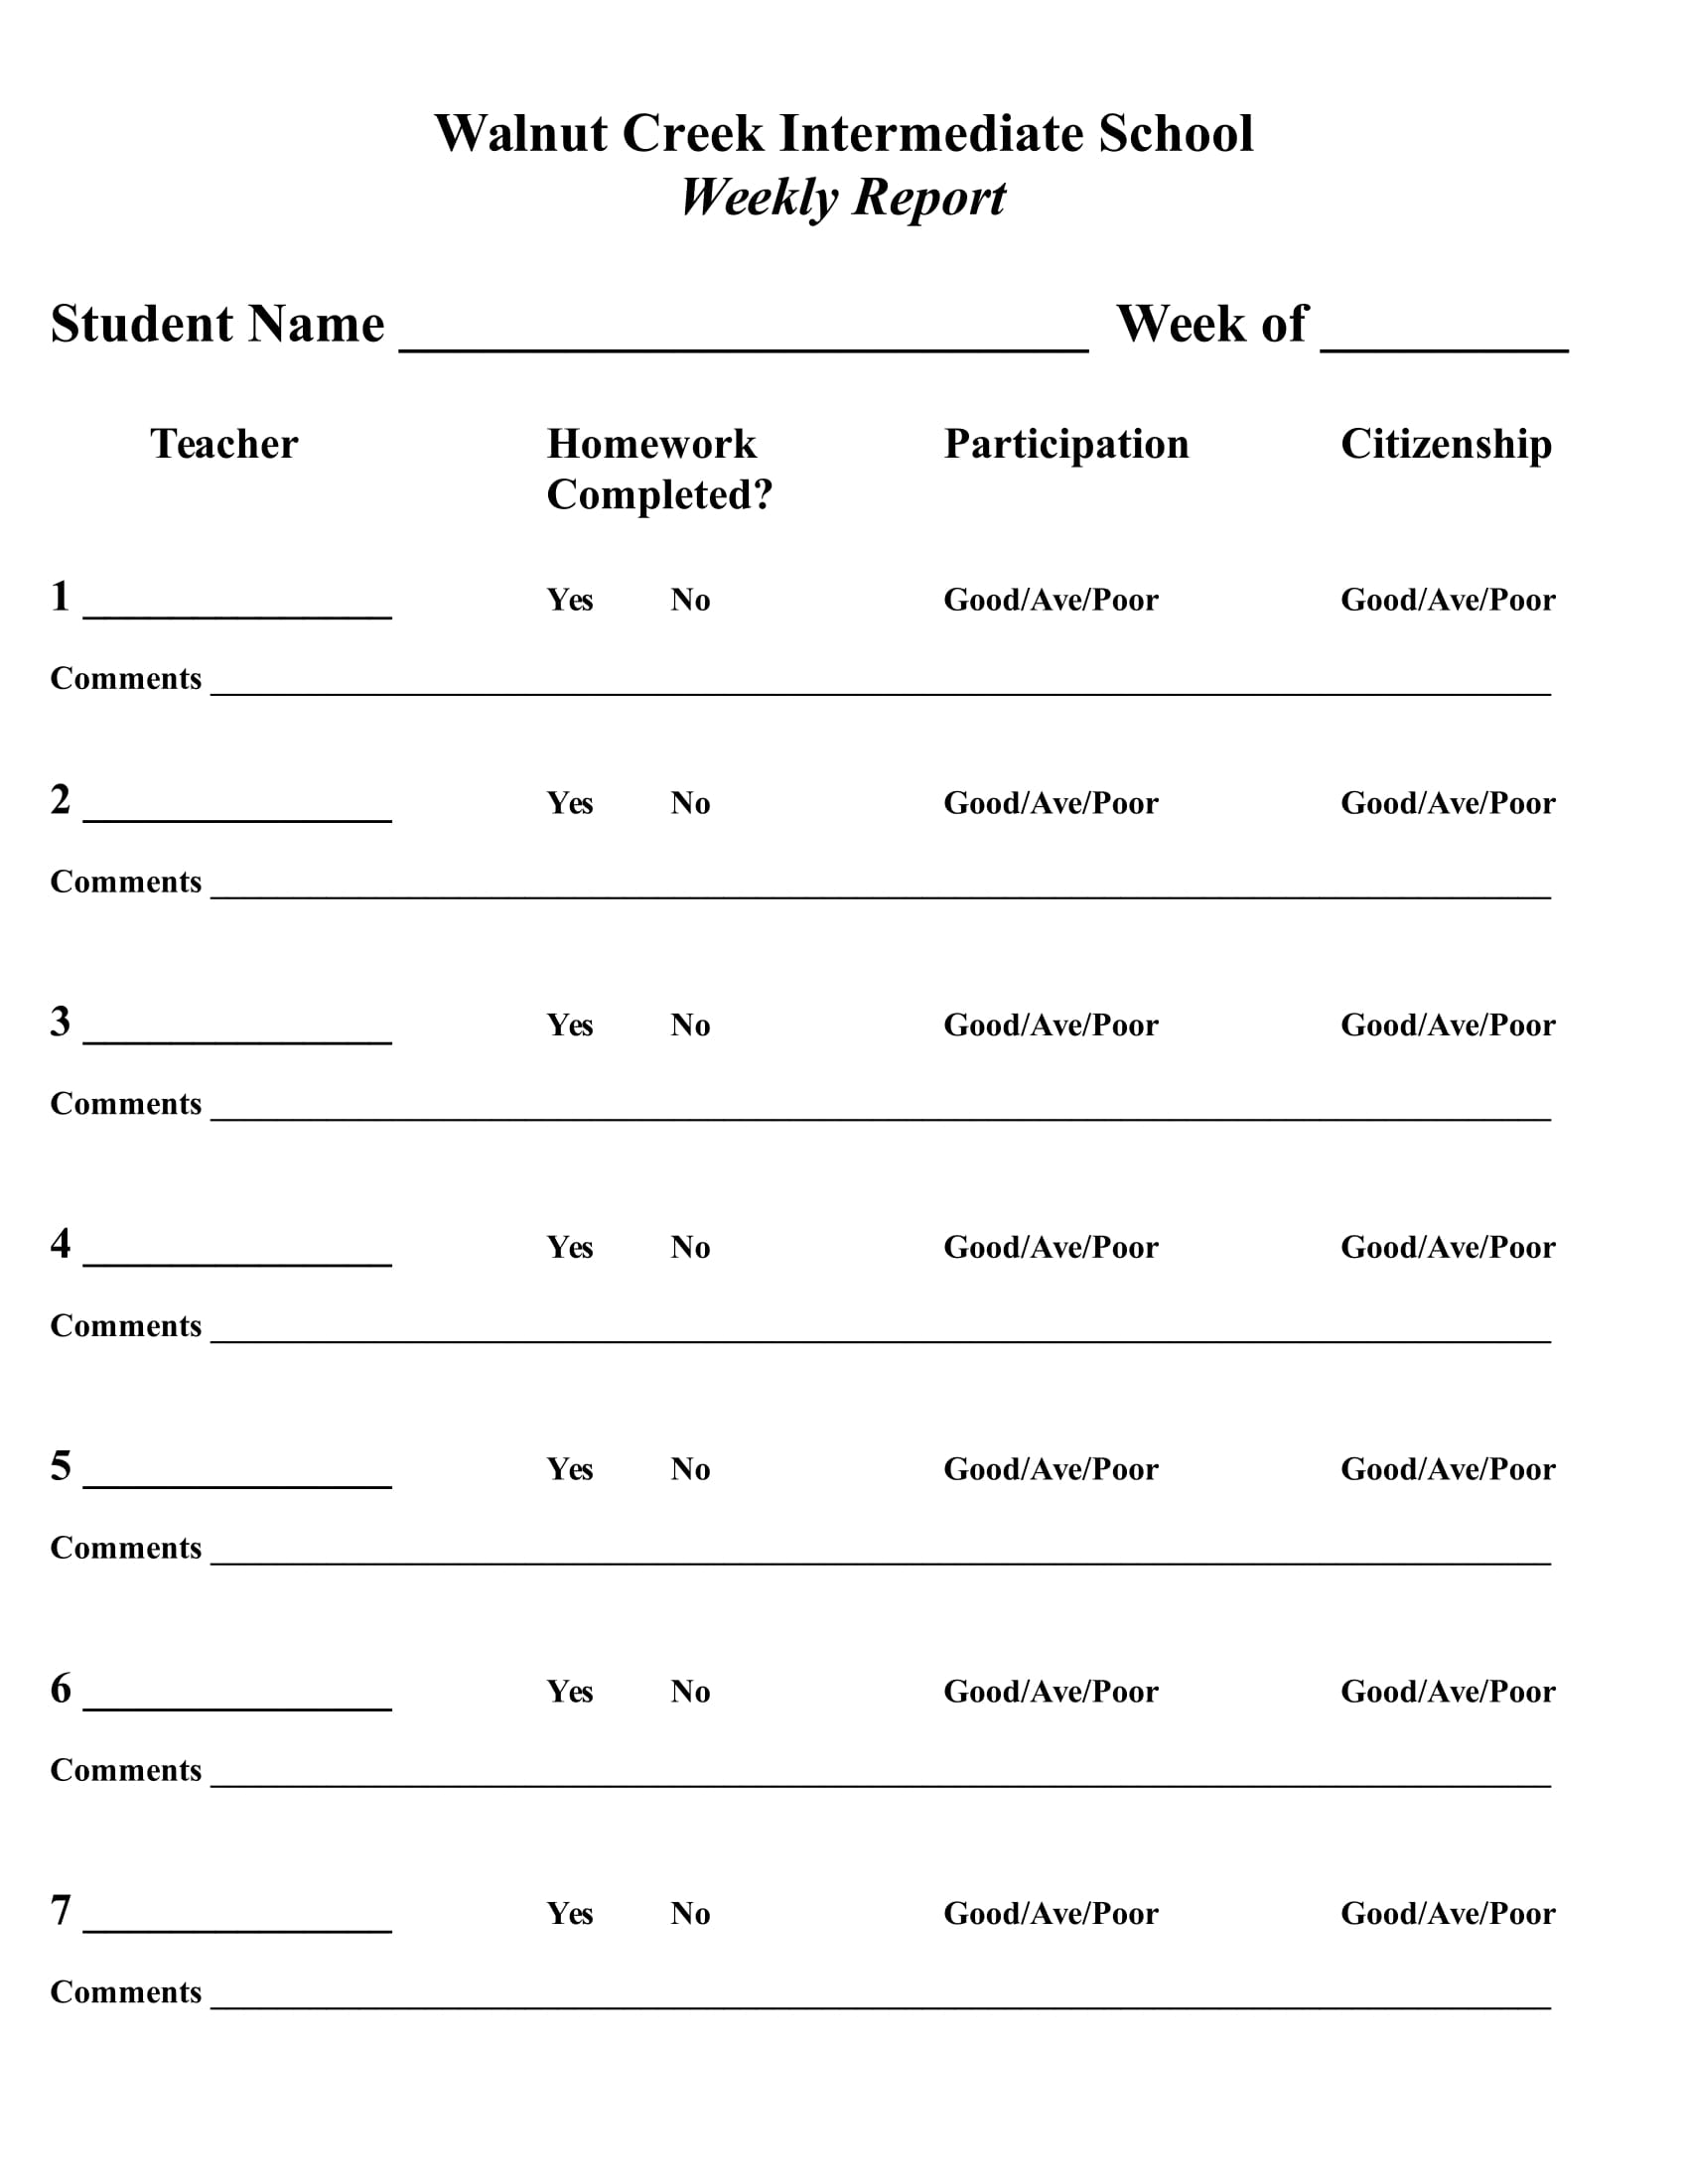 students participation weekly report form 1